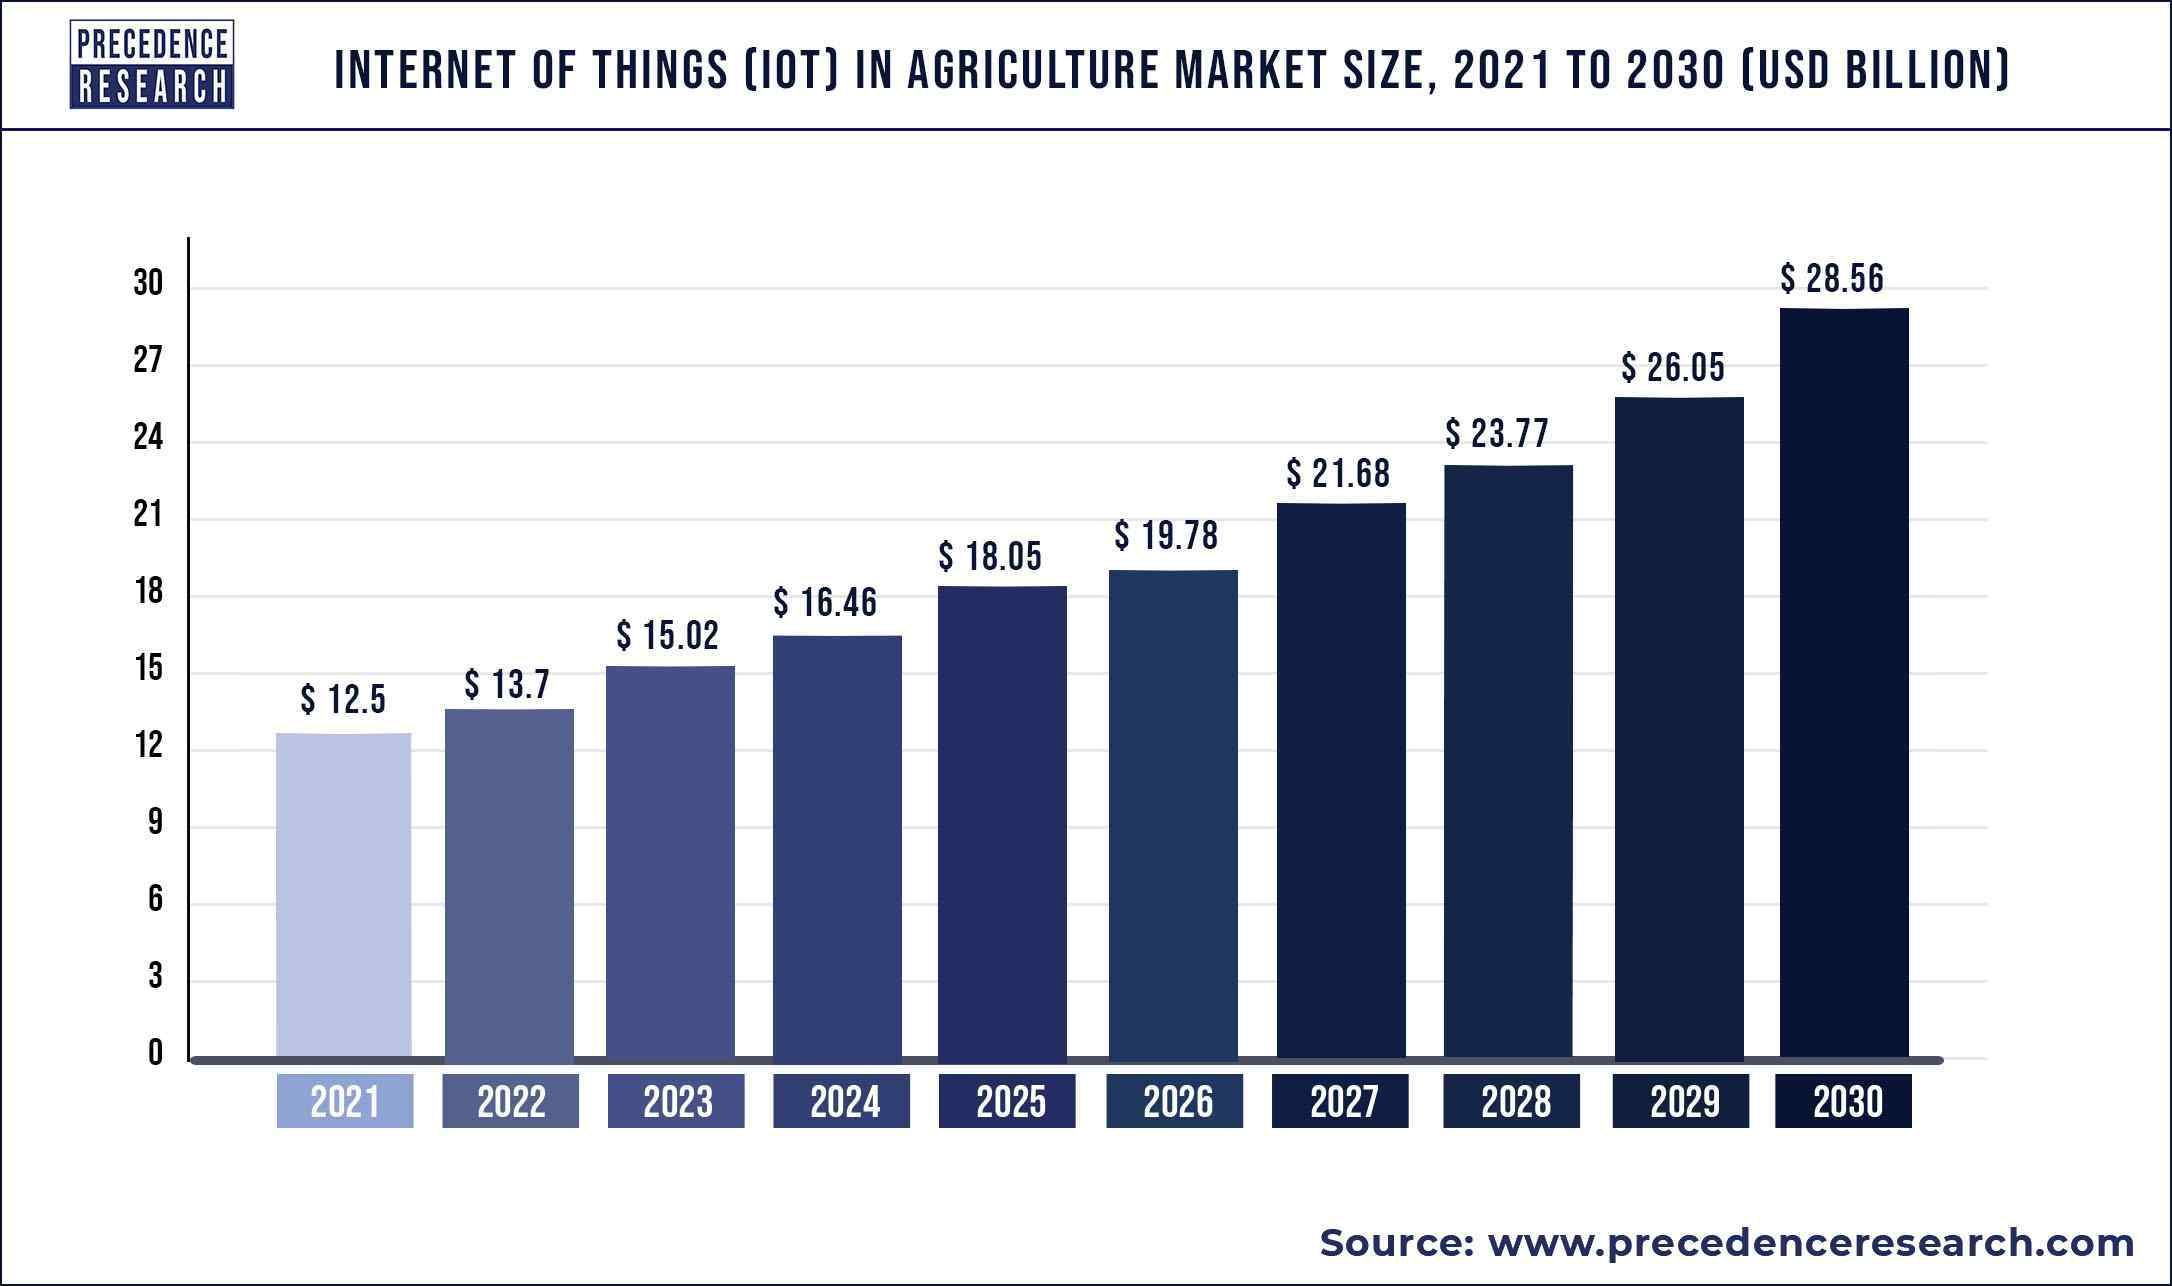 Internet of Things in Agriculture Market Size 2022 to 2030